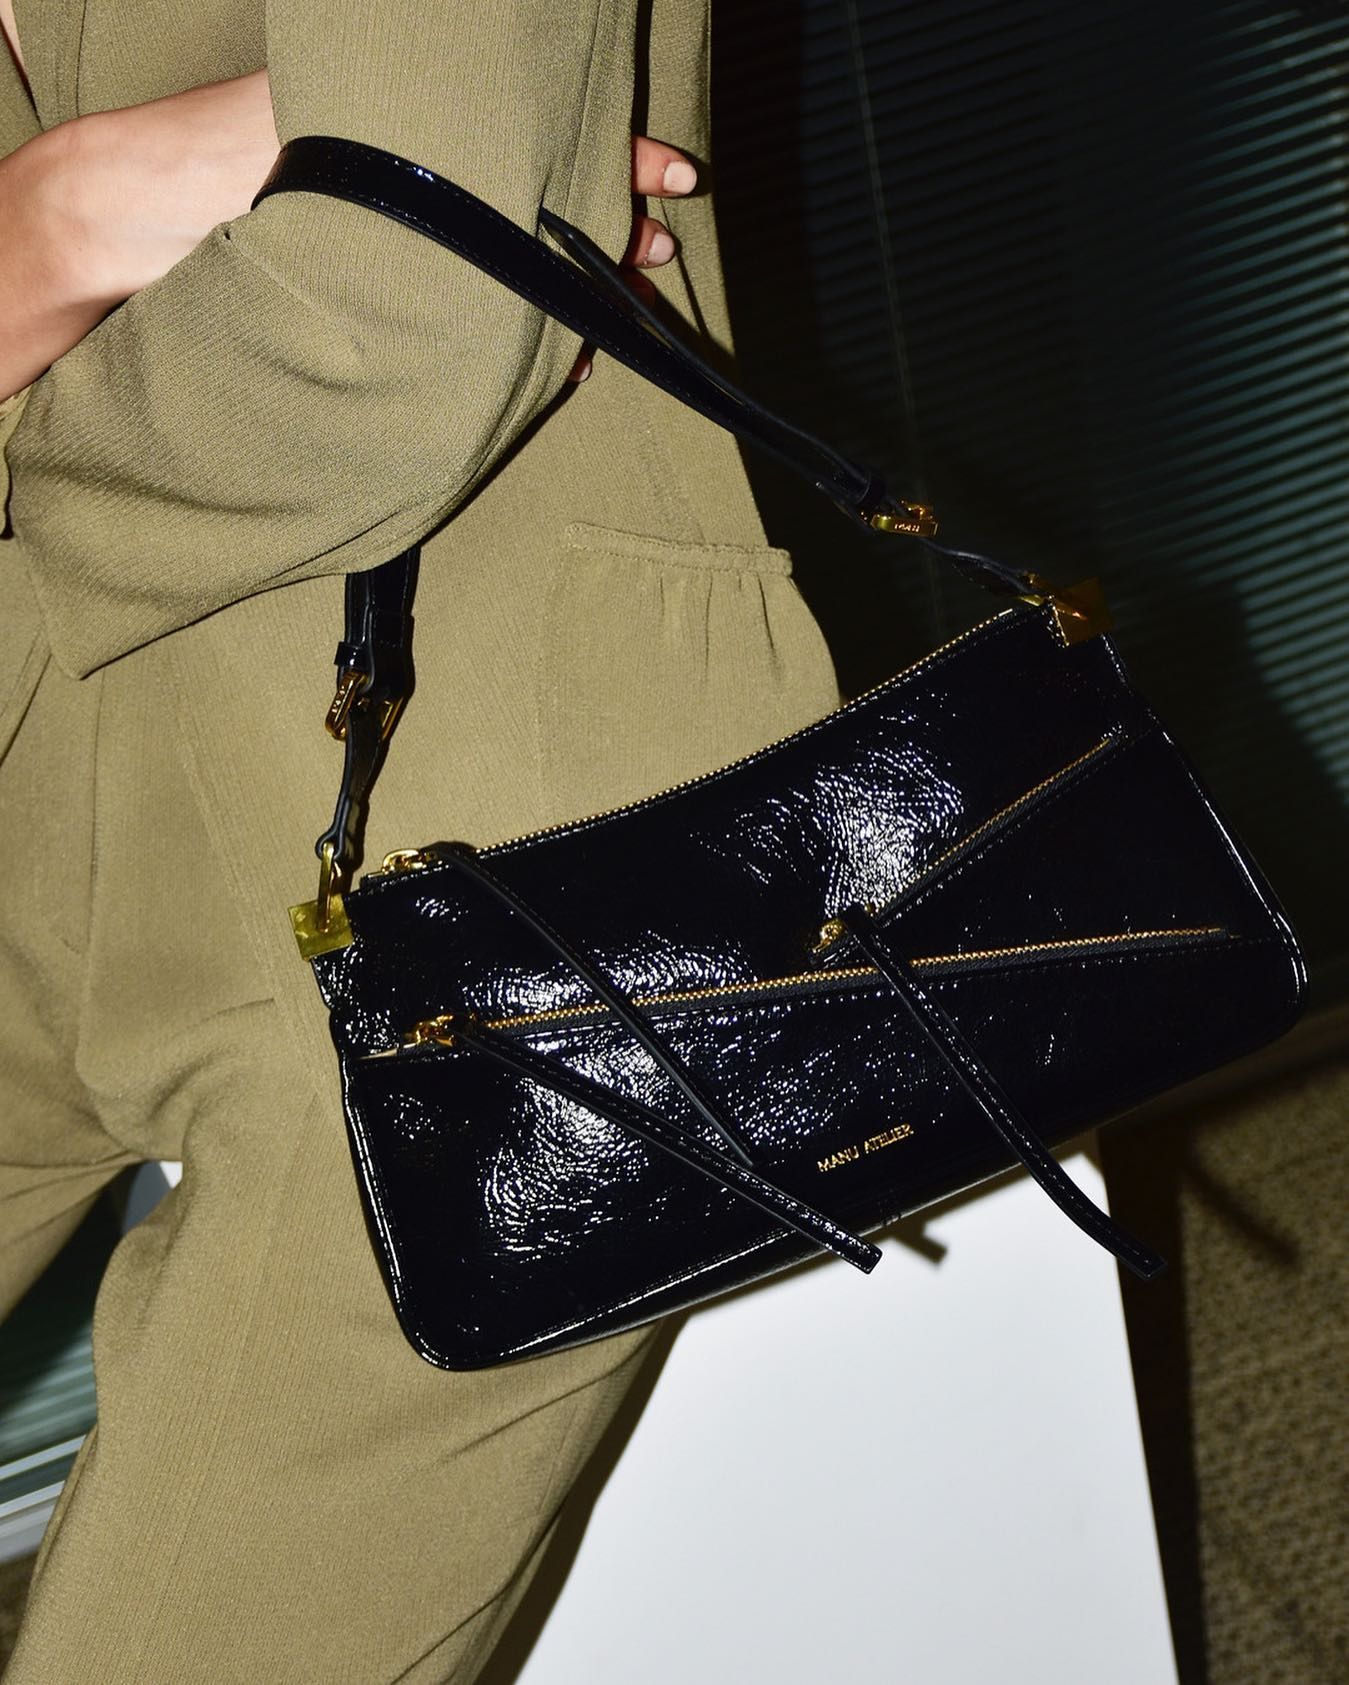 These are the 25 Best Handbag Brands (in Our Opinion)